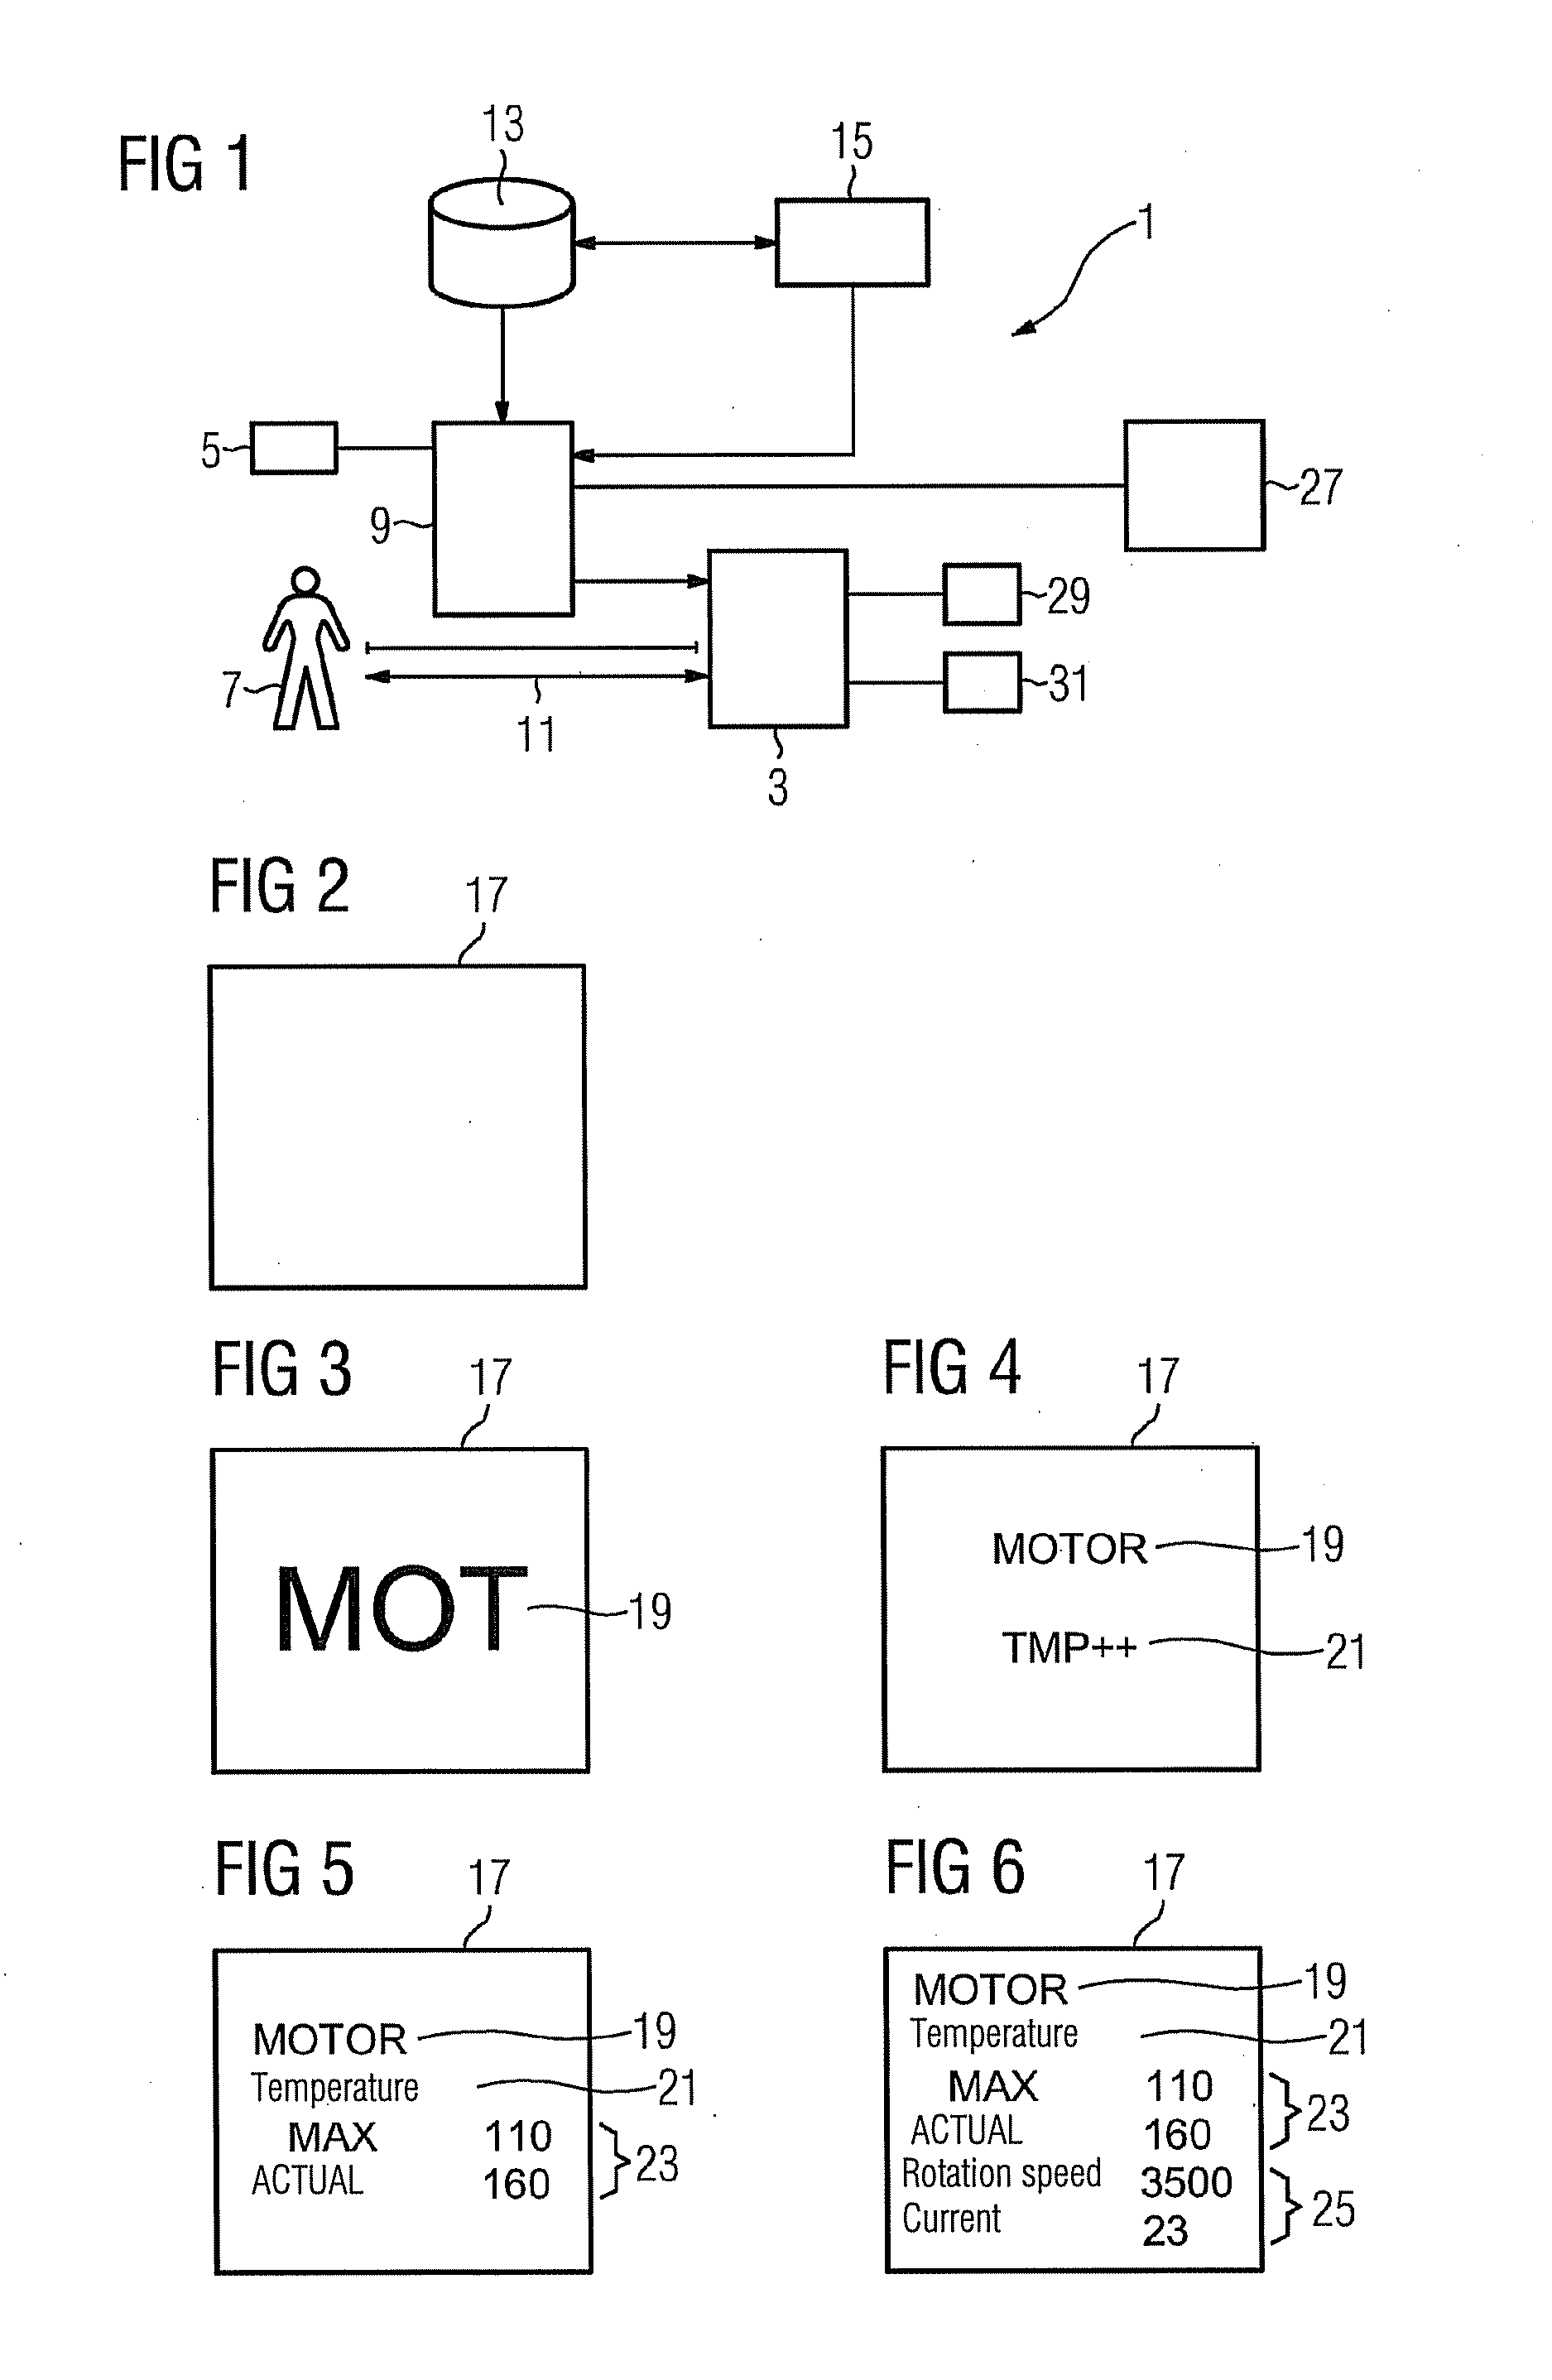 Display device for displaying a system state